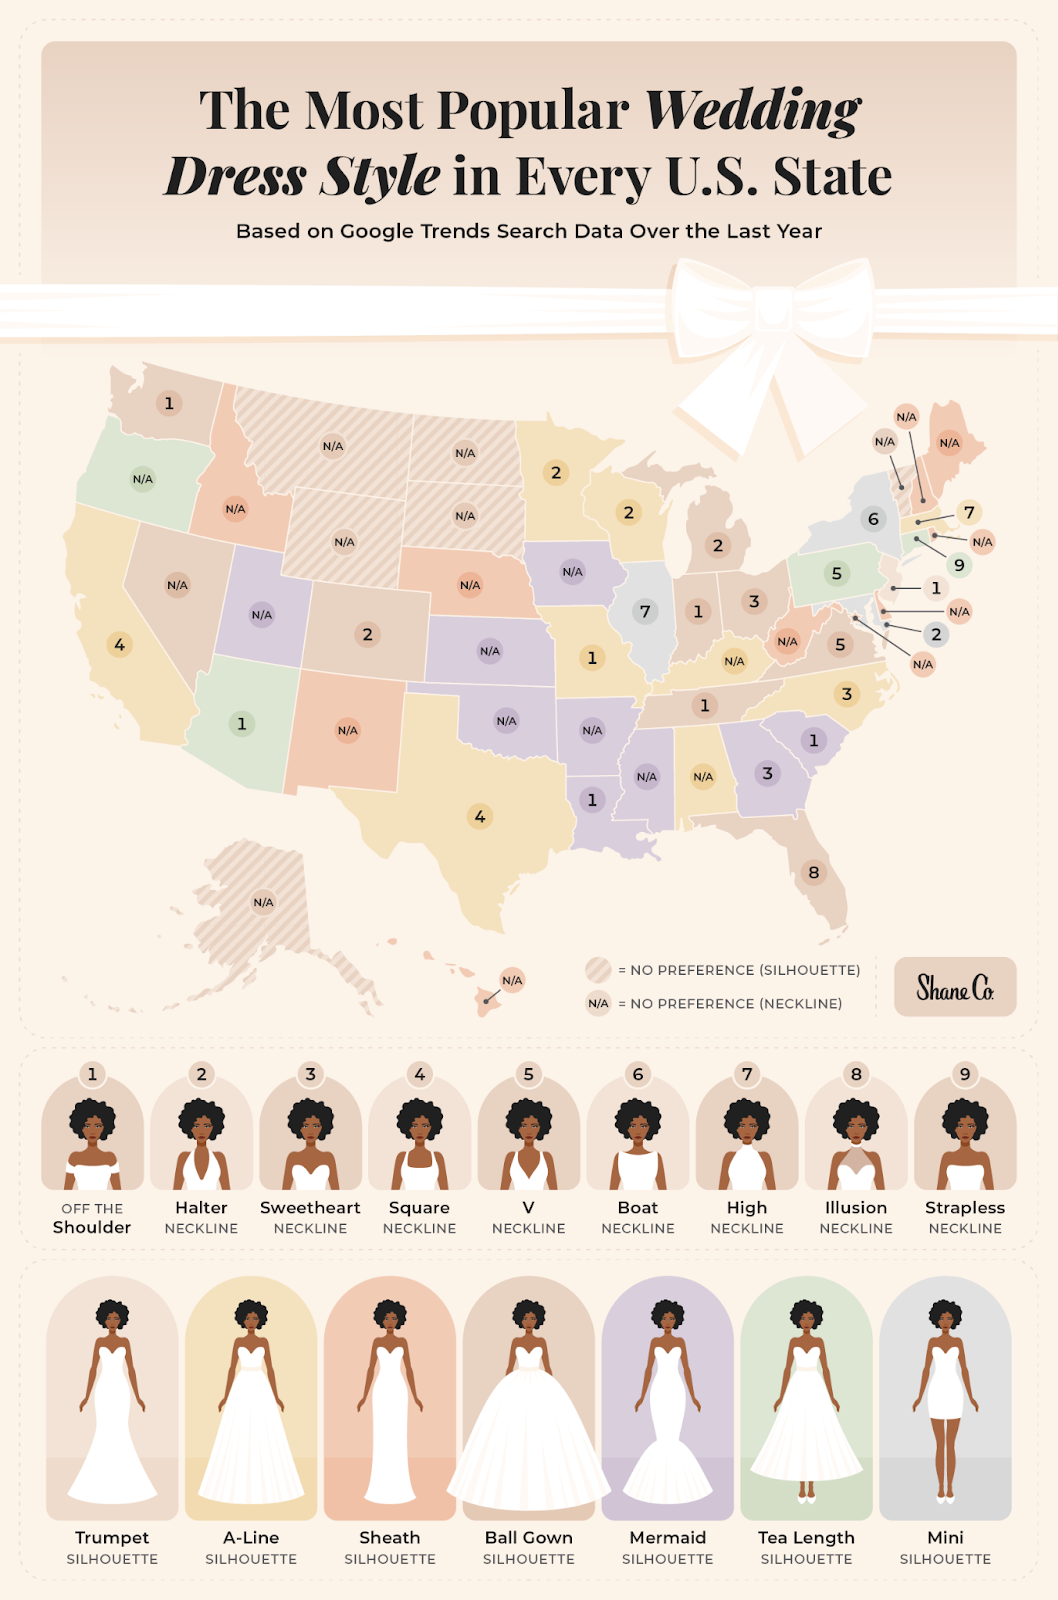 U.S. map illustrating the most popular wedding dress styles in every state.